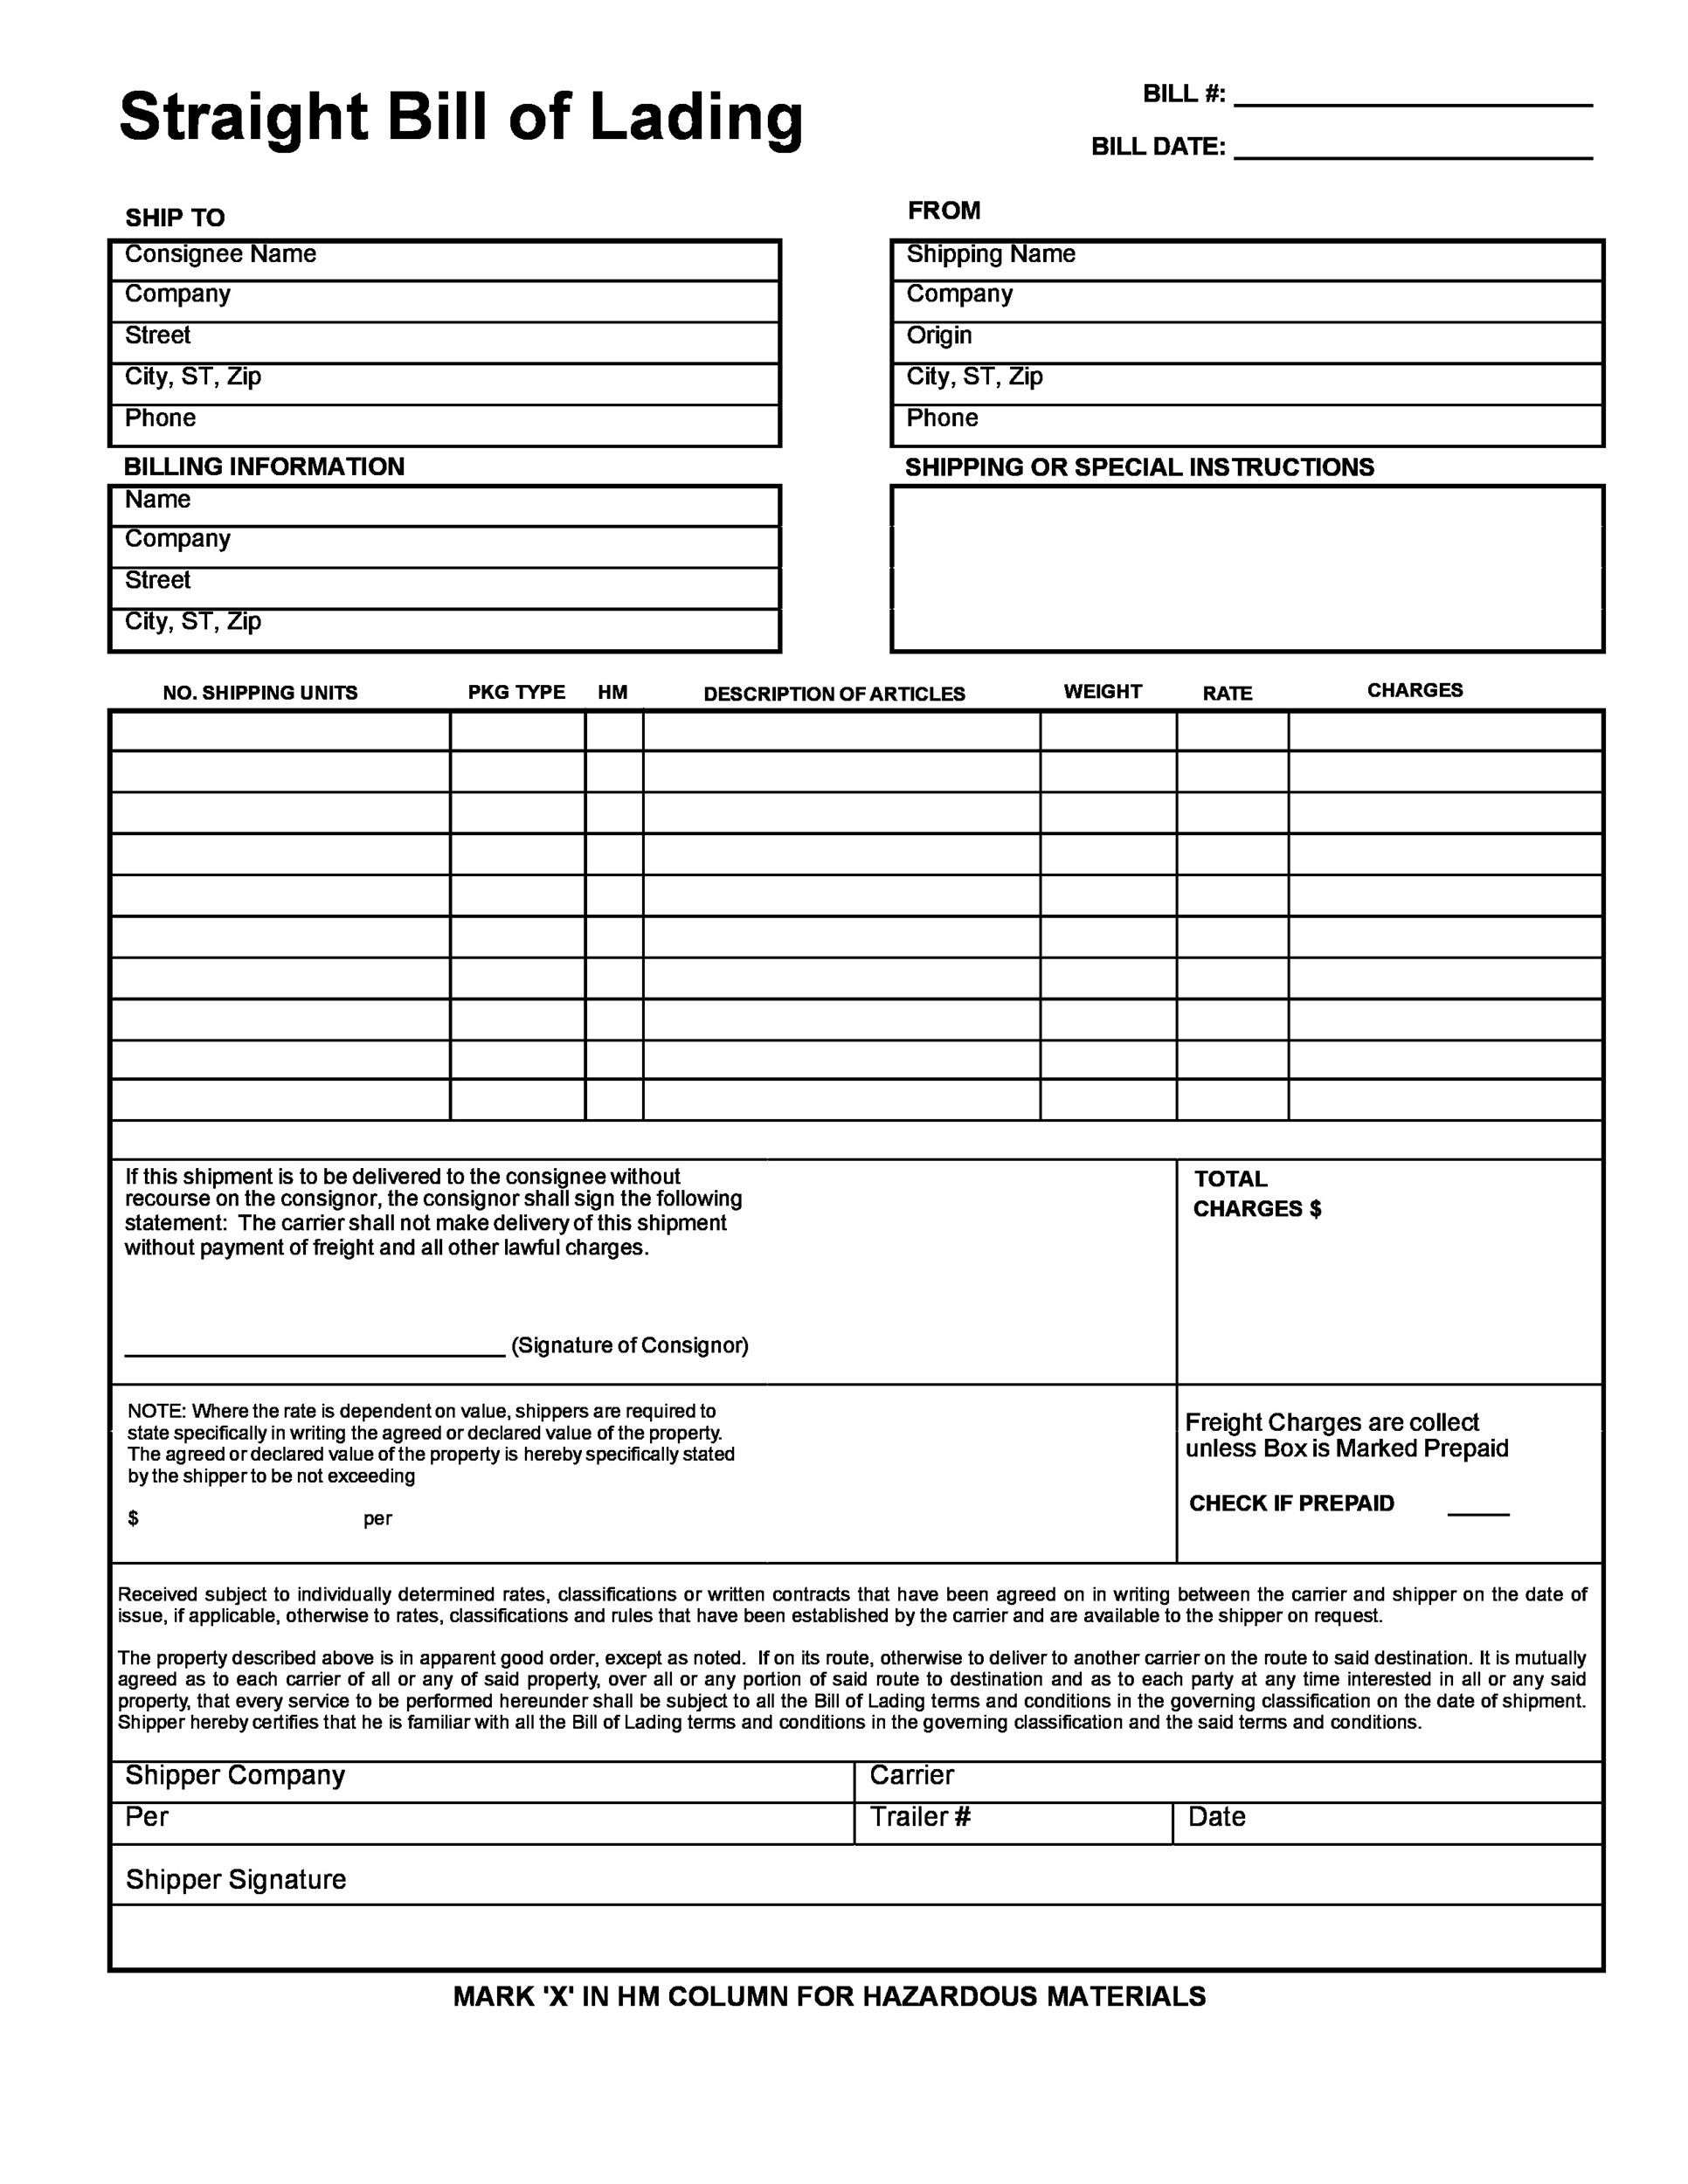 40-free-bill-of-lading-forms-templates-templatelab